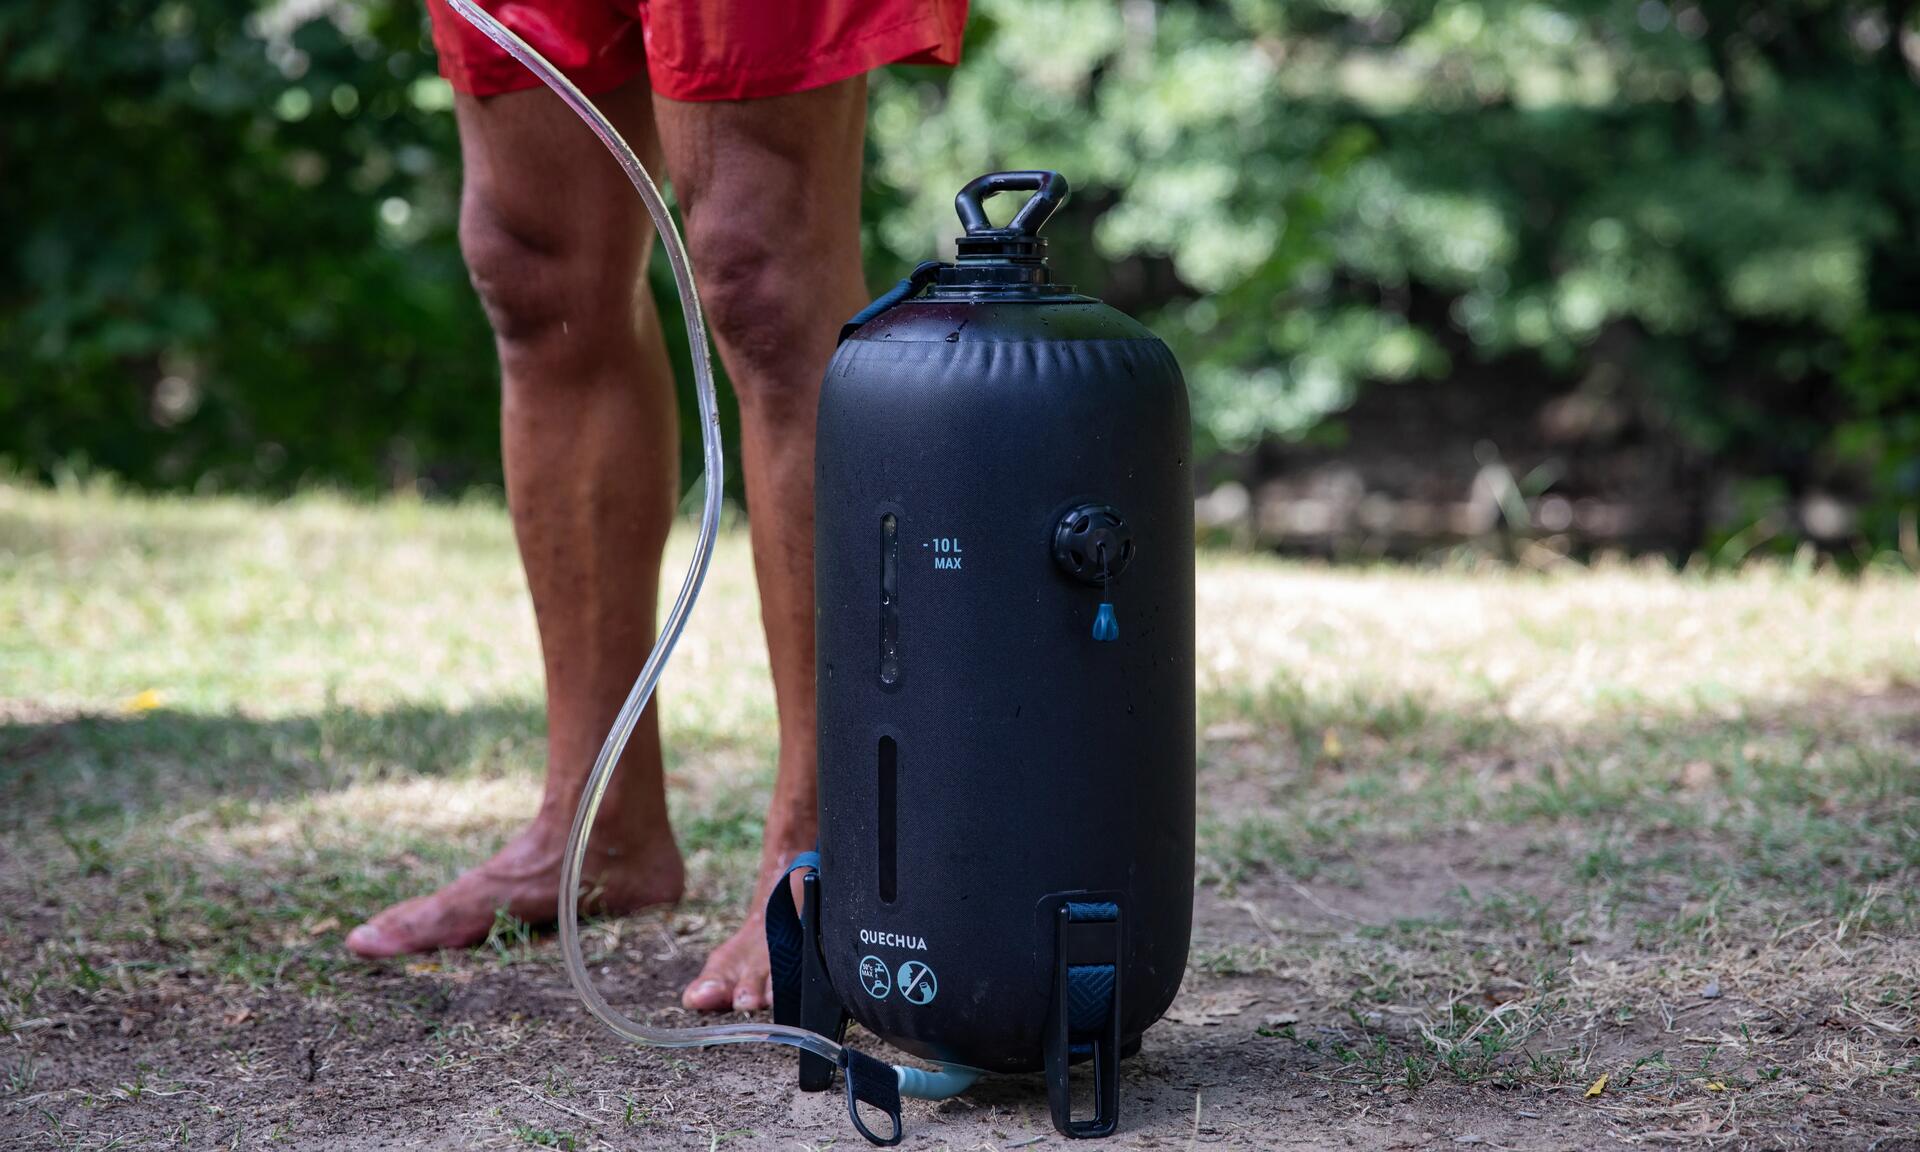 Which solar shower should you choose for your trips?